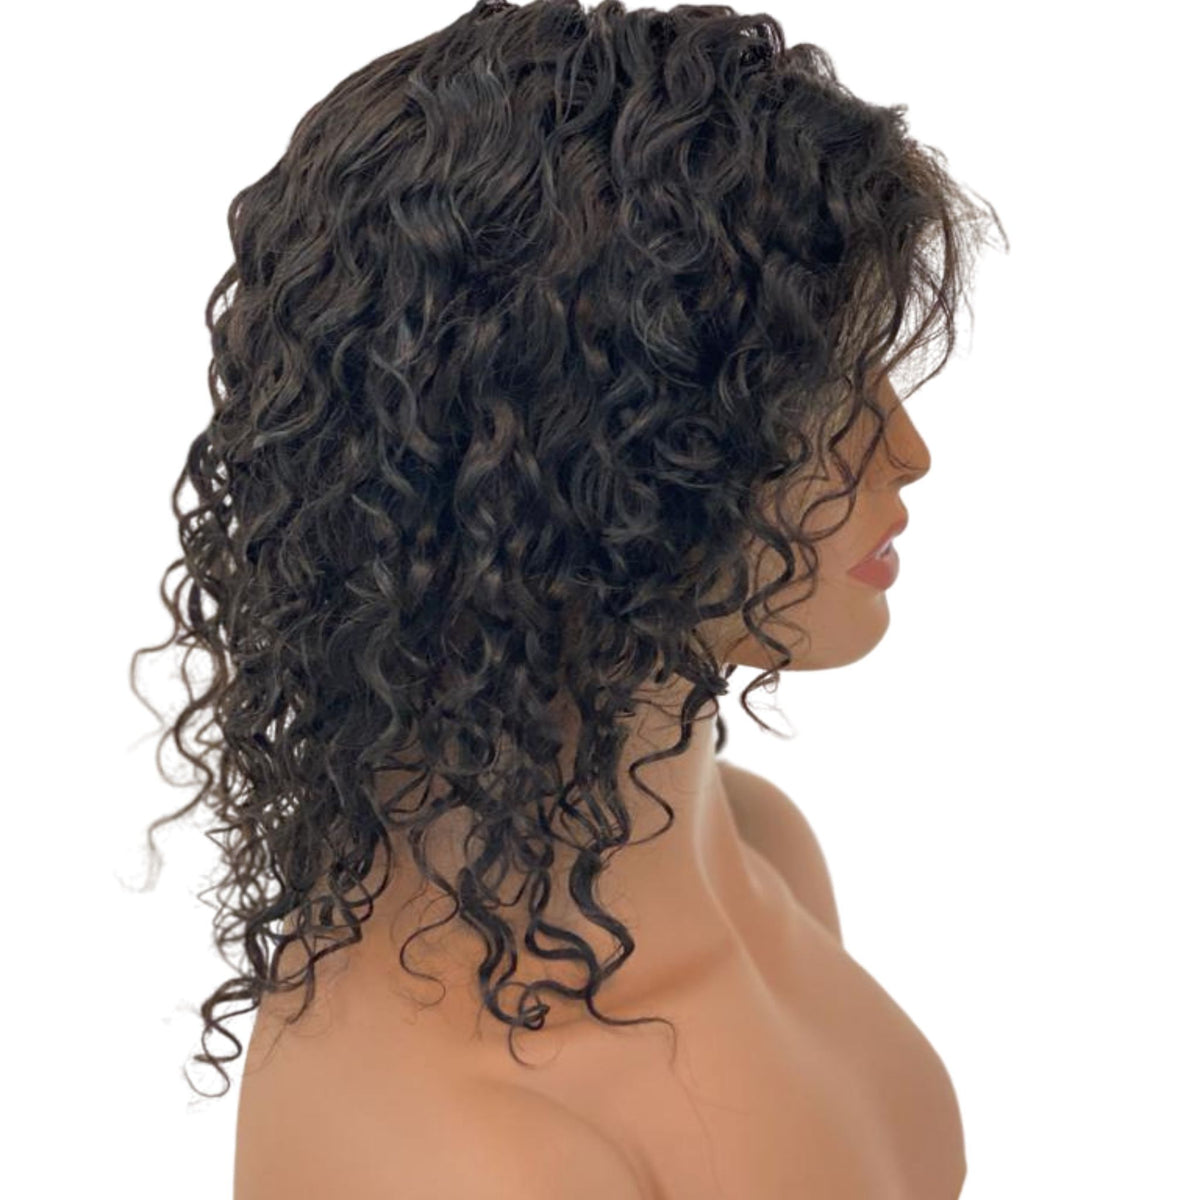 Raw Indian Temple Hair Directly From India,Cuticle Aligned Remy Raw Indian  Hair Vendor,Curly Indian